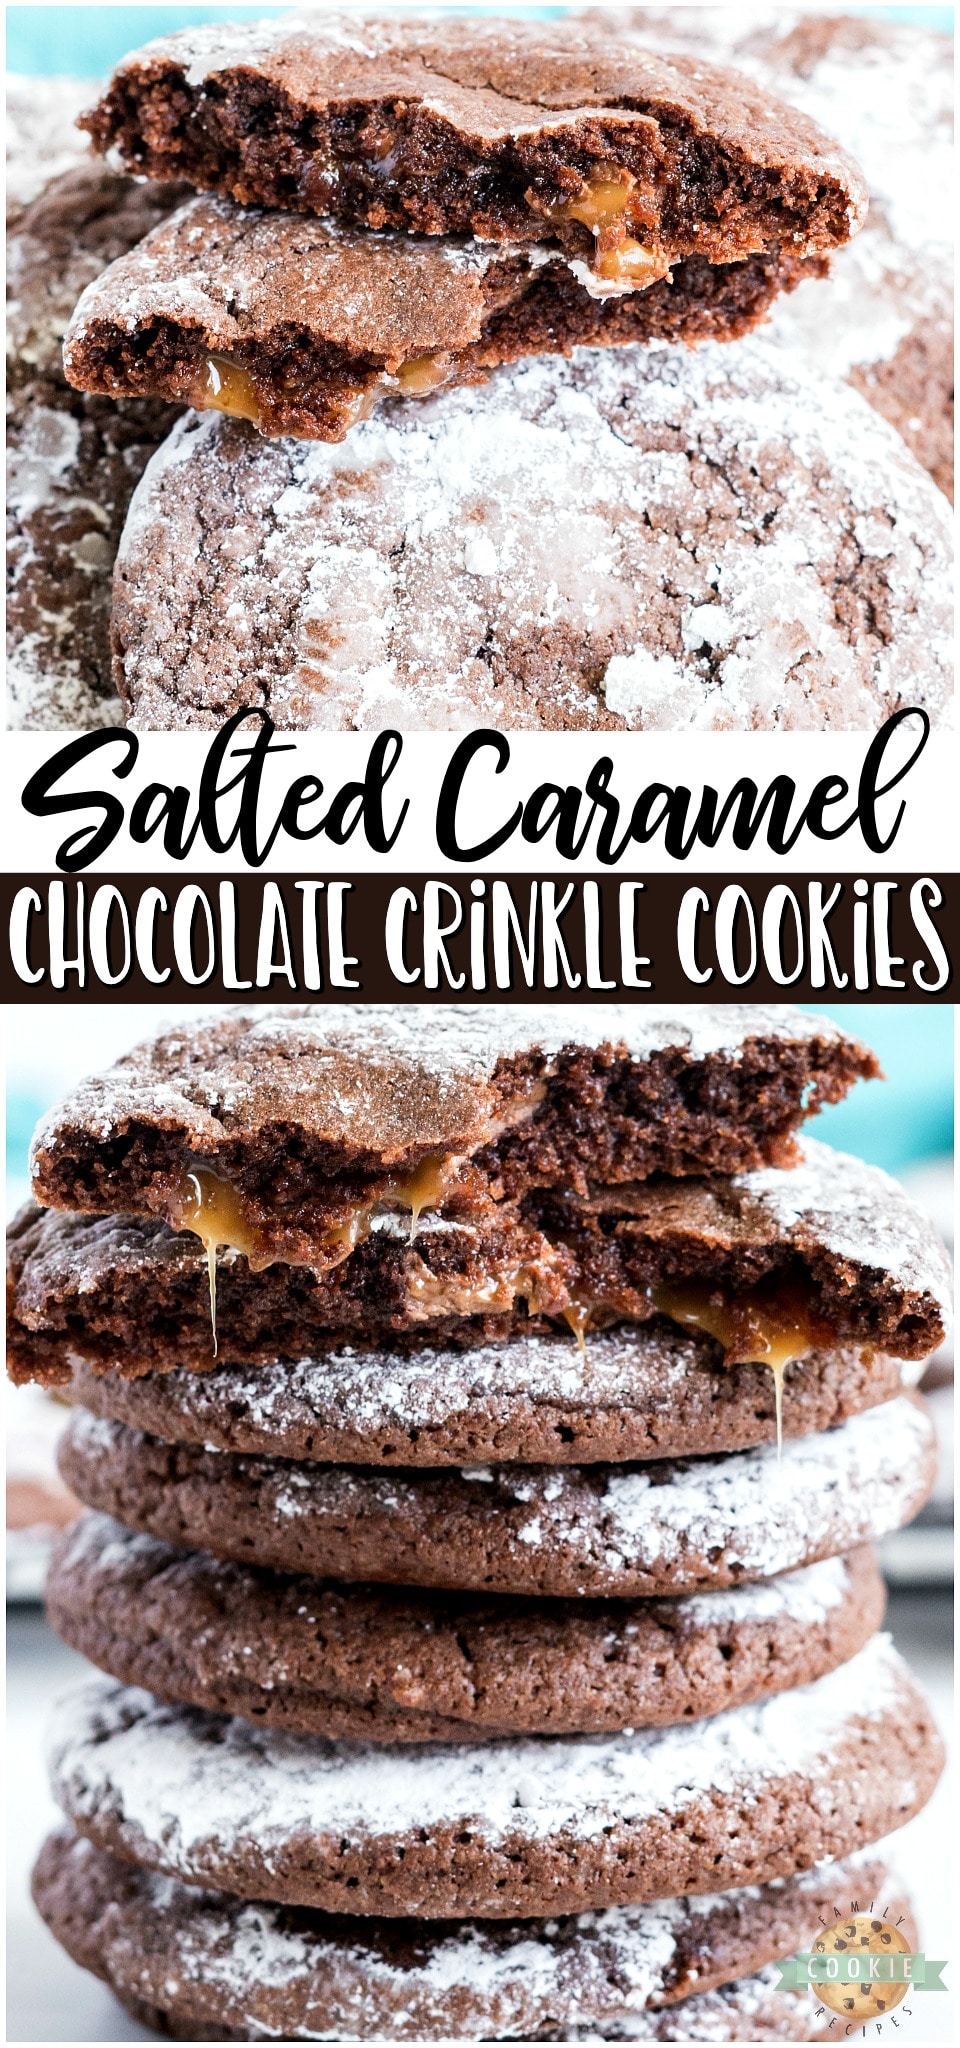 Caramel chocolate crinkle cookies are soft & chewy cookies with a salted caramel filling. Traditional Chocolate Crinkle Cookies with caramel filling that everyone loves! 